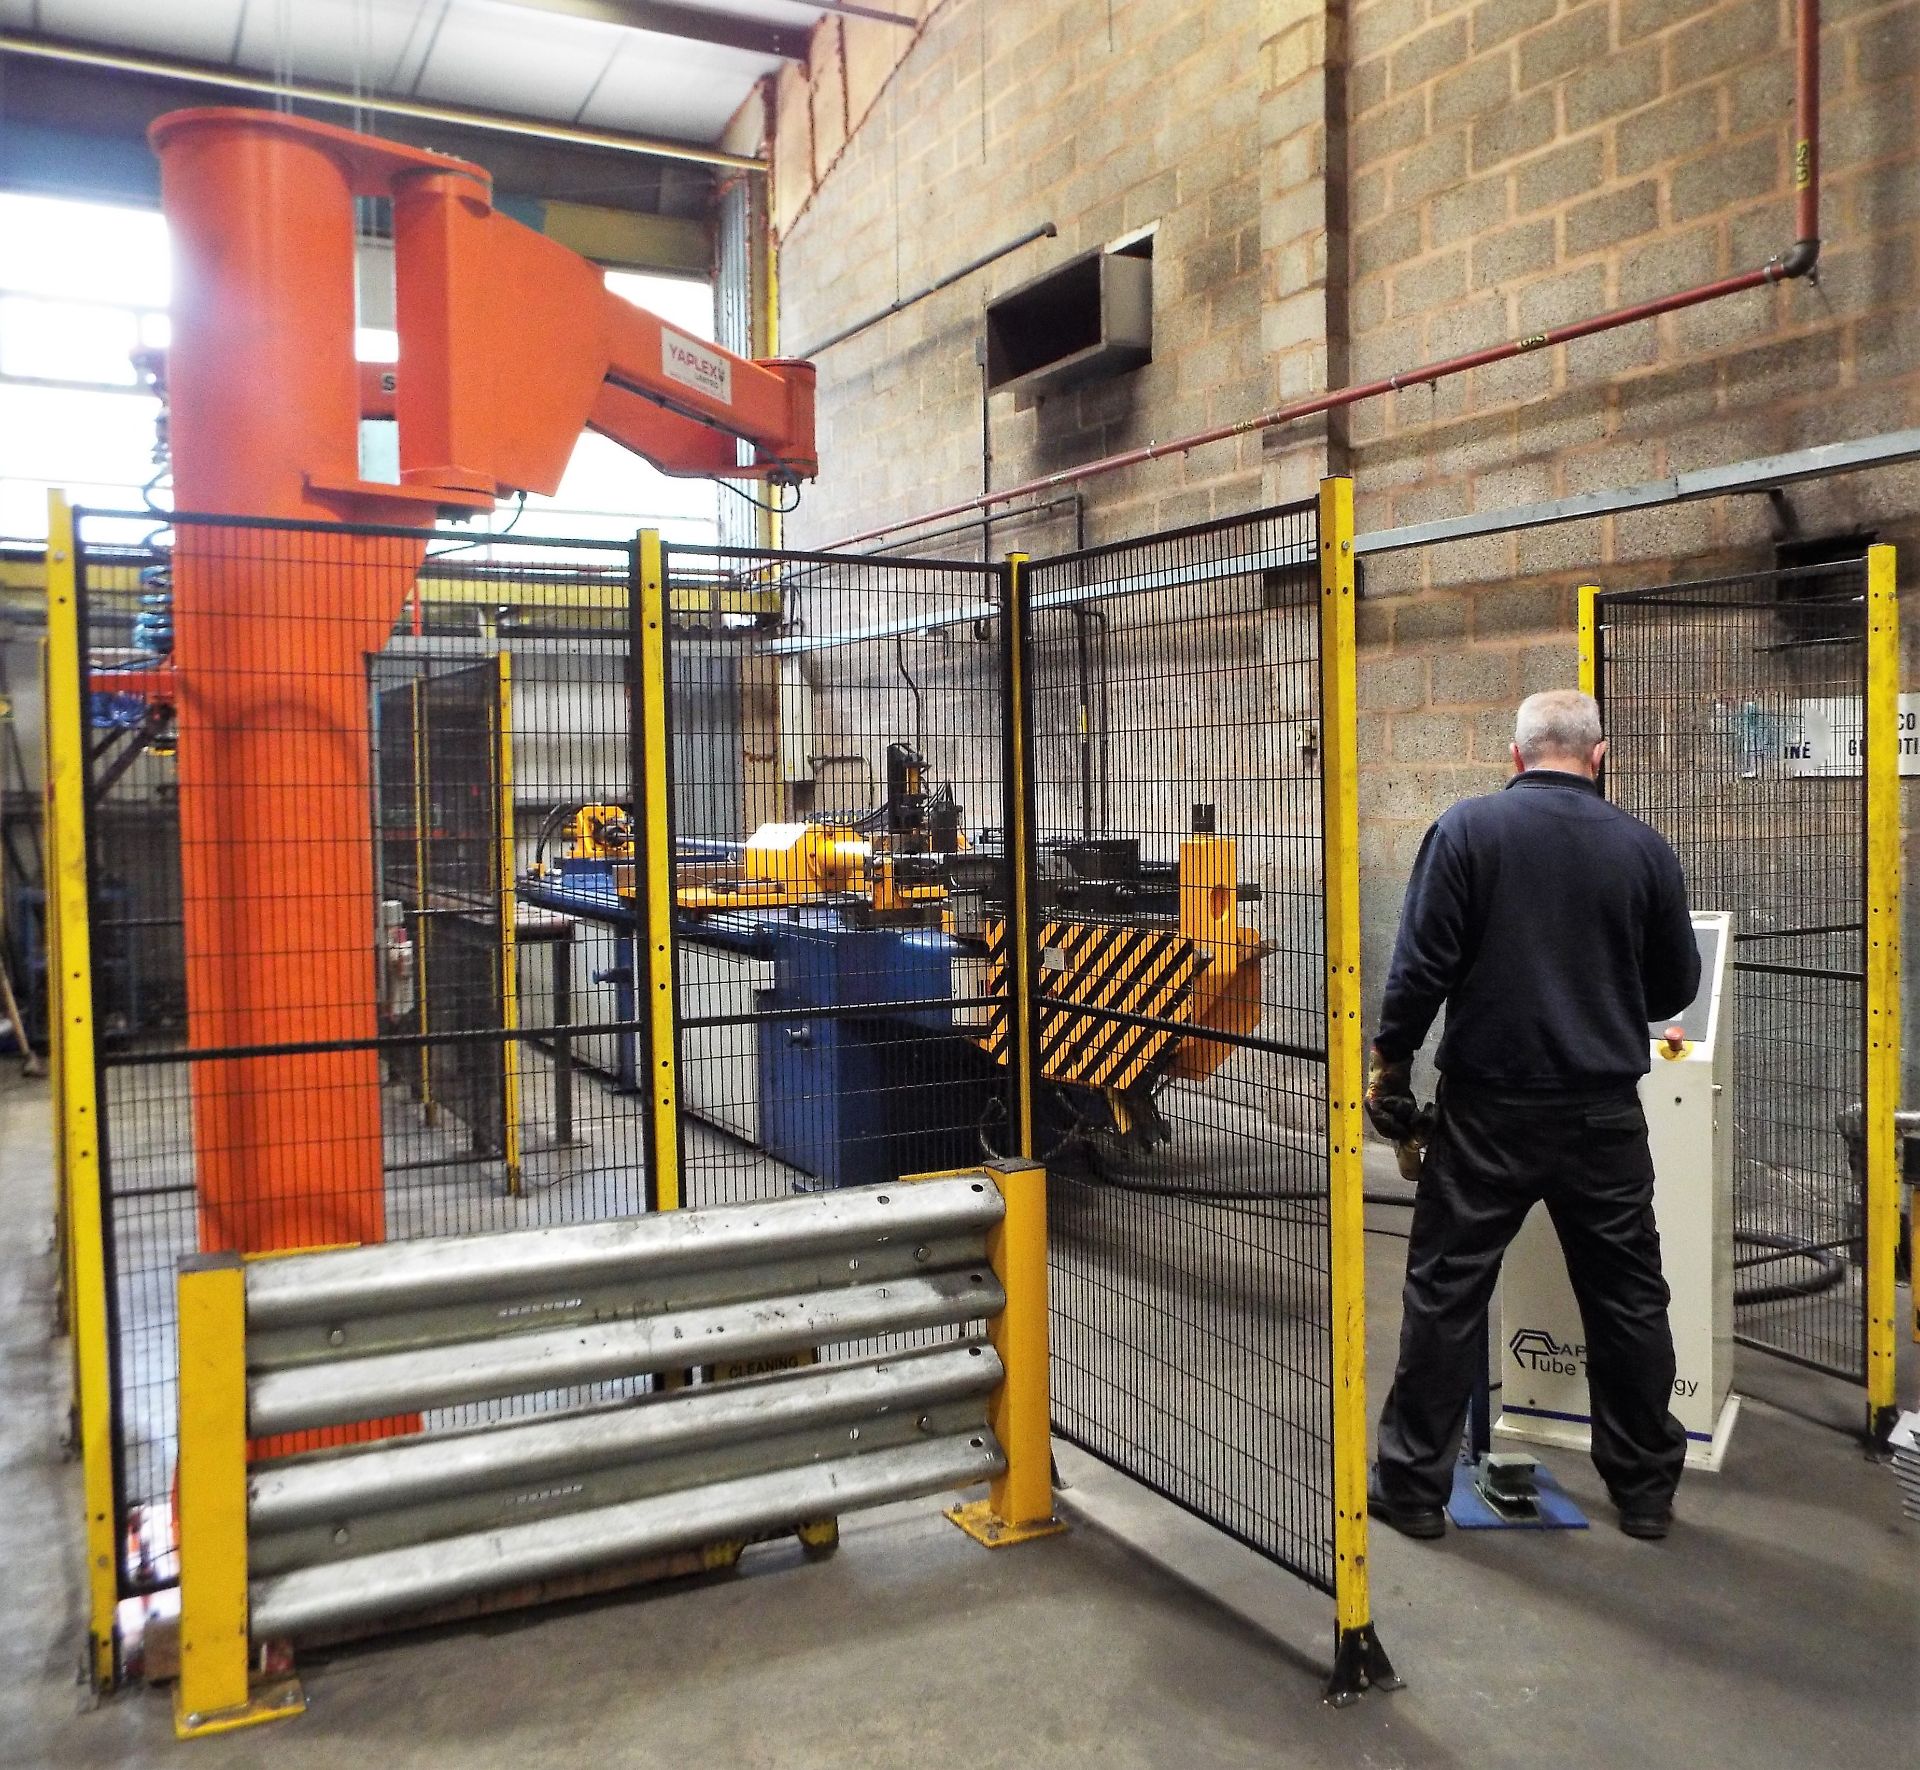 King Mazon Hydraulic Tube Bending / Forming Cell cw Yaplex 50Kg Mechanical Handling Unit - Image 2 of 5